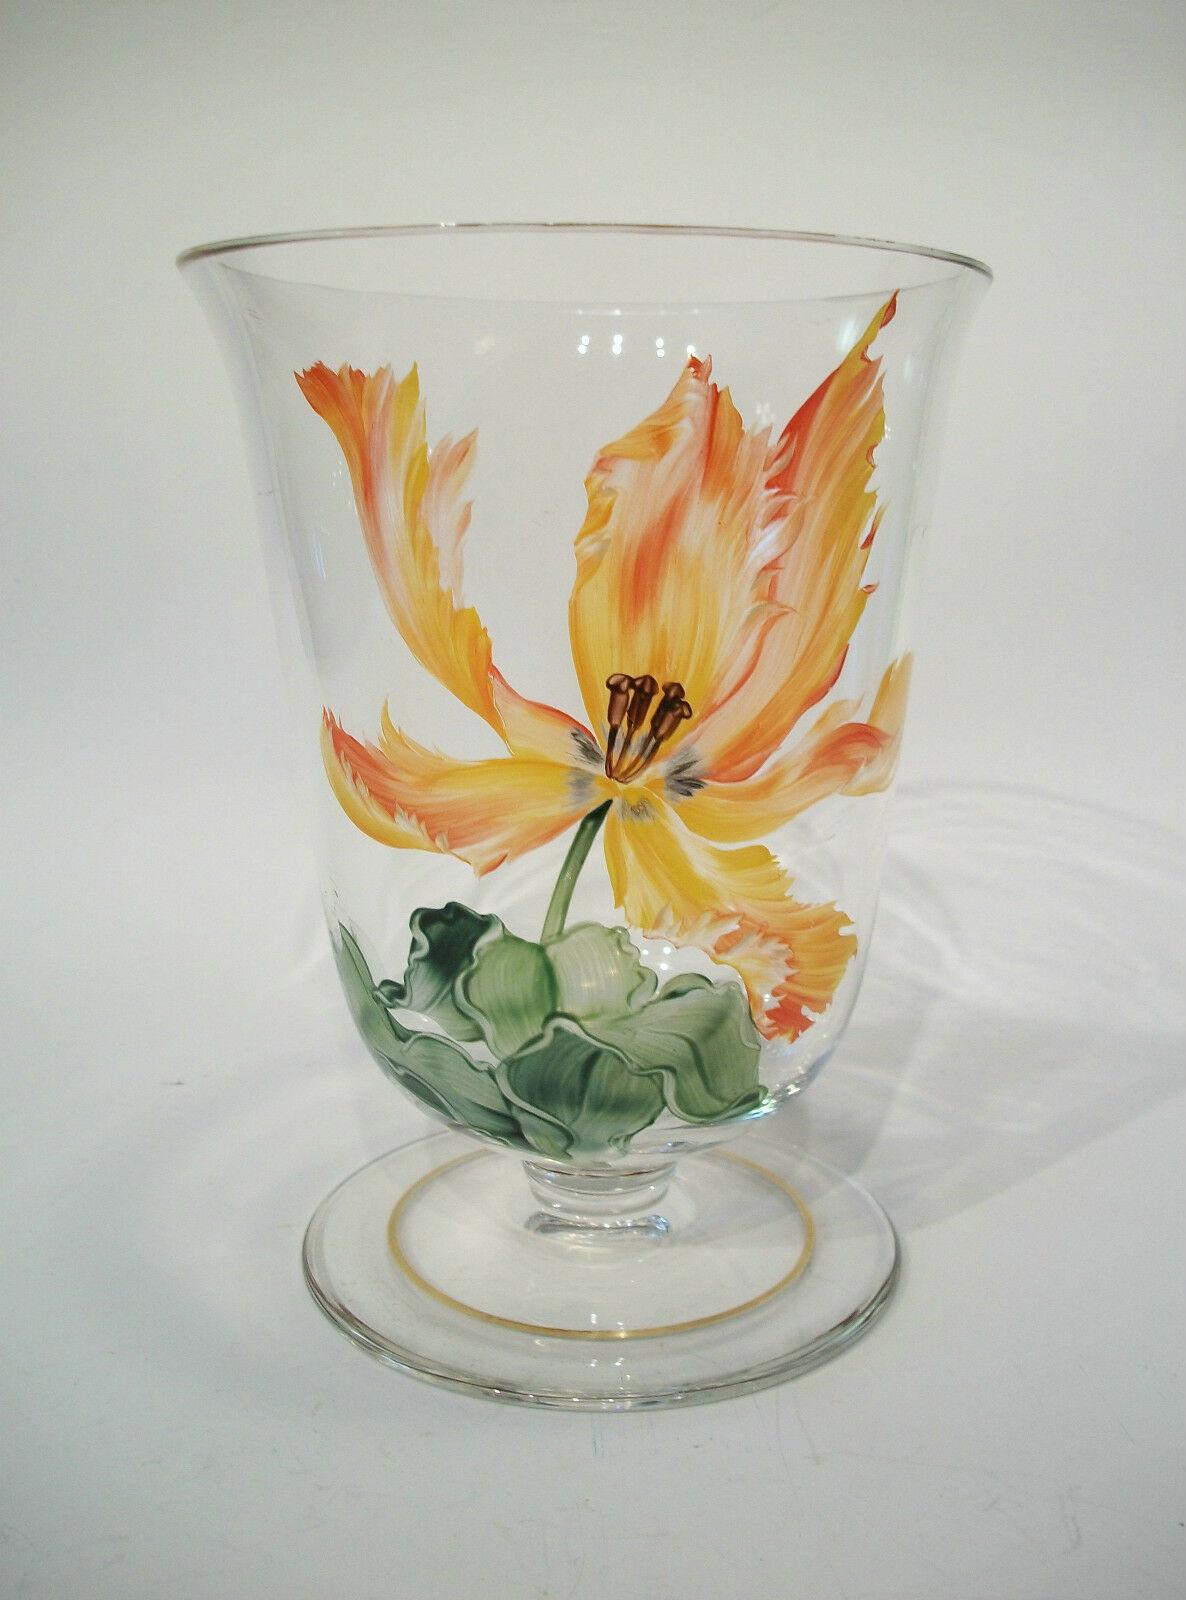 J. & L. LOBMEYR - mid century fine quality Patrician form vase - featuring a hand painted and enameled orange and yellow 'parrot tulip' - gilt rim - unsigned (likely Lobmeyr as this pattern was introduced in 1952 - after earlier beaker designs with